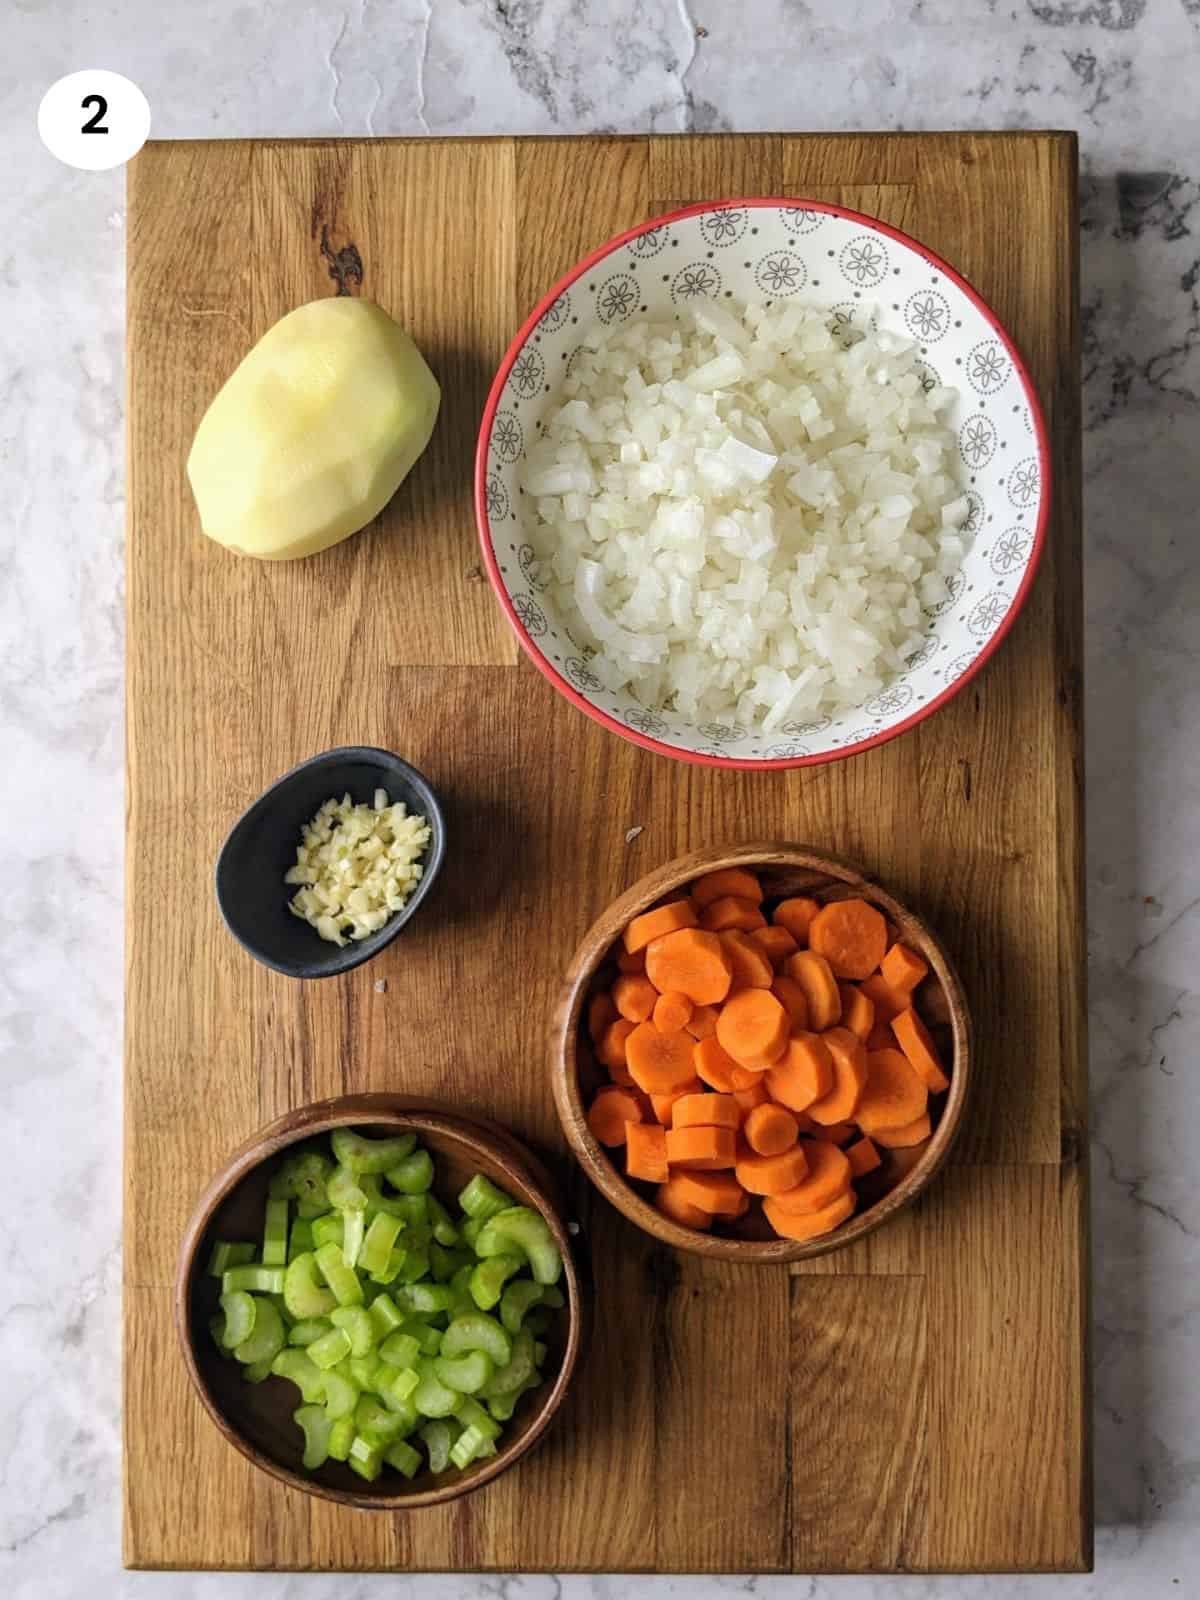 Chopped vegetables, celery, onion, carrots and garlic.